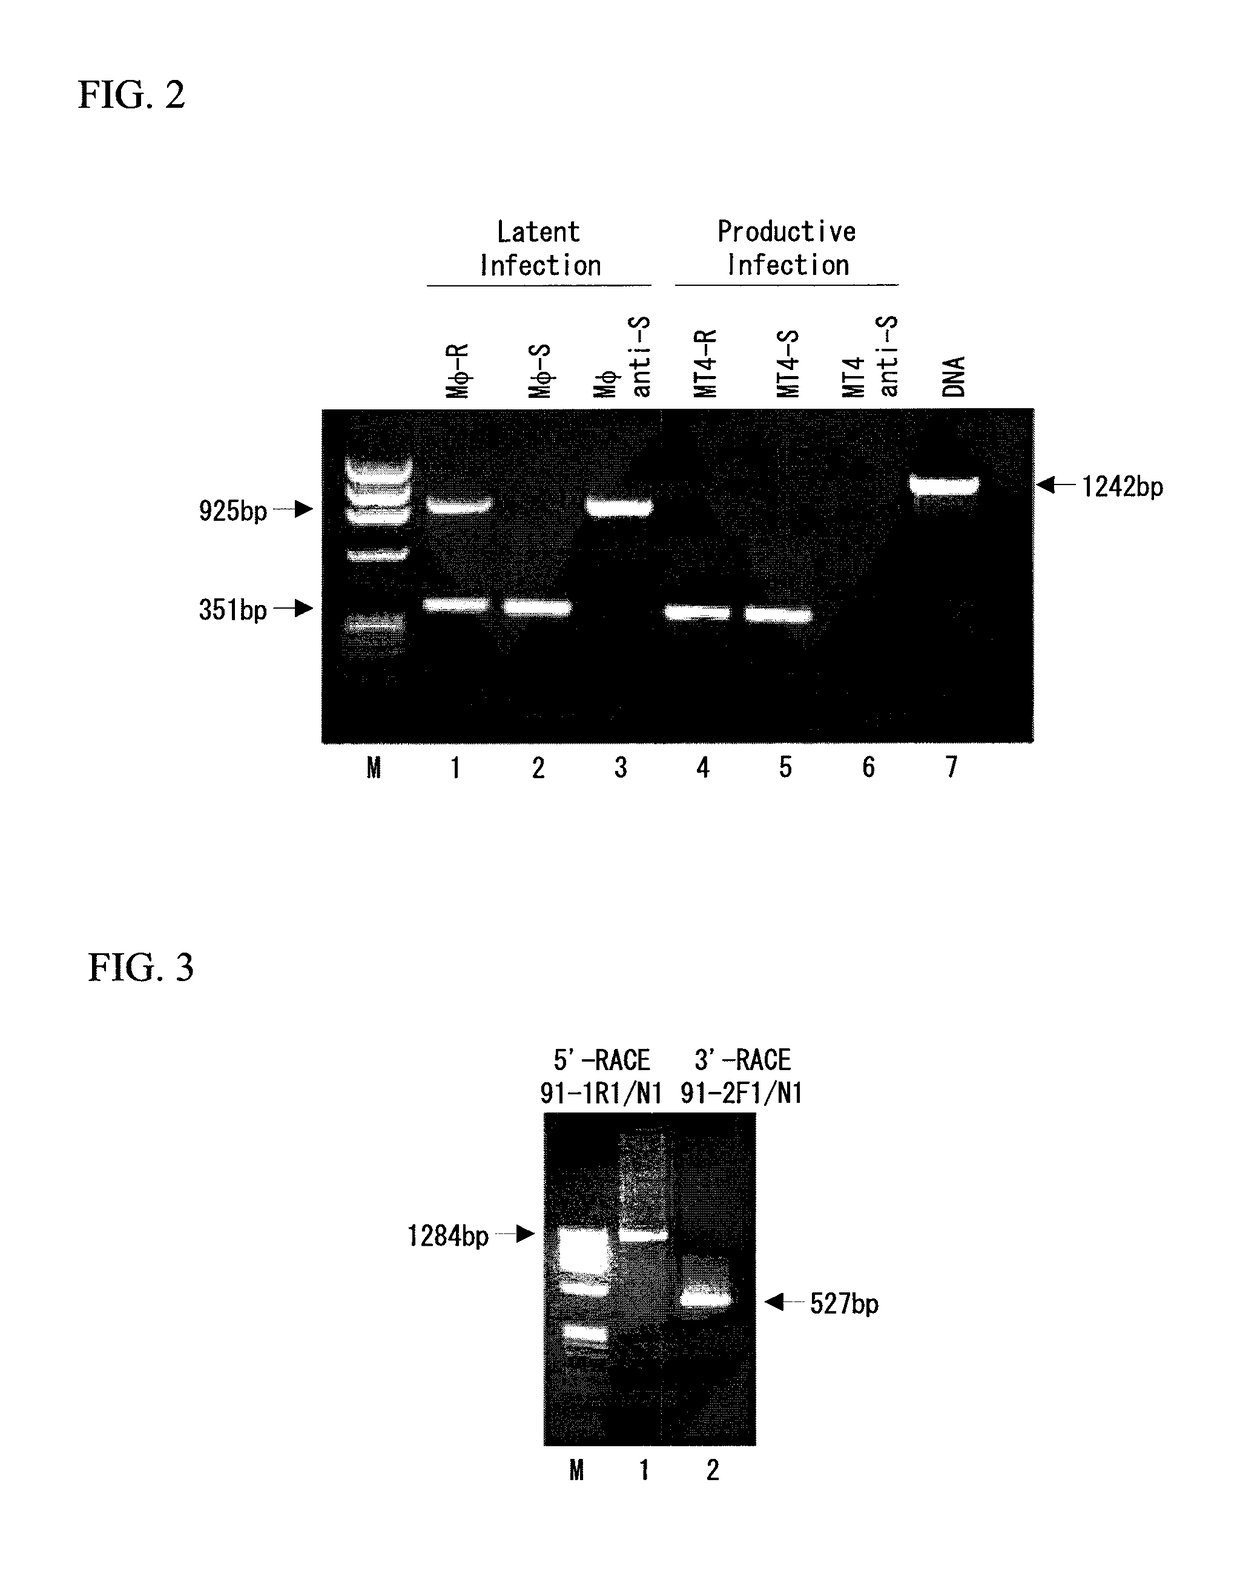 Method for treating or preventing mood disorders